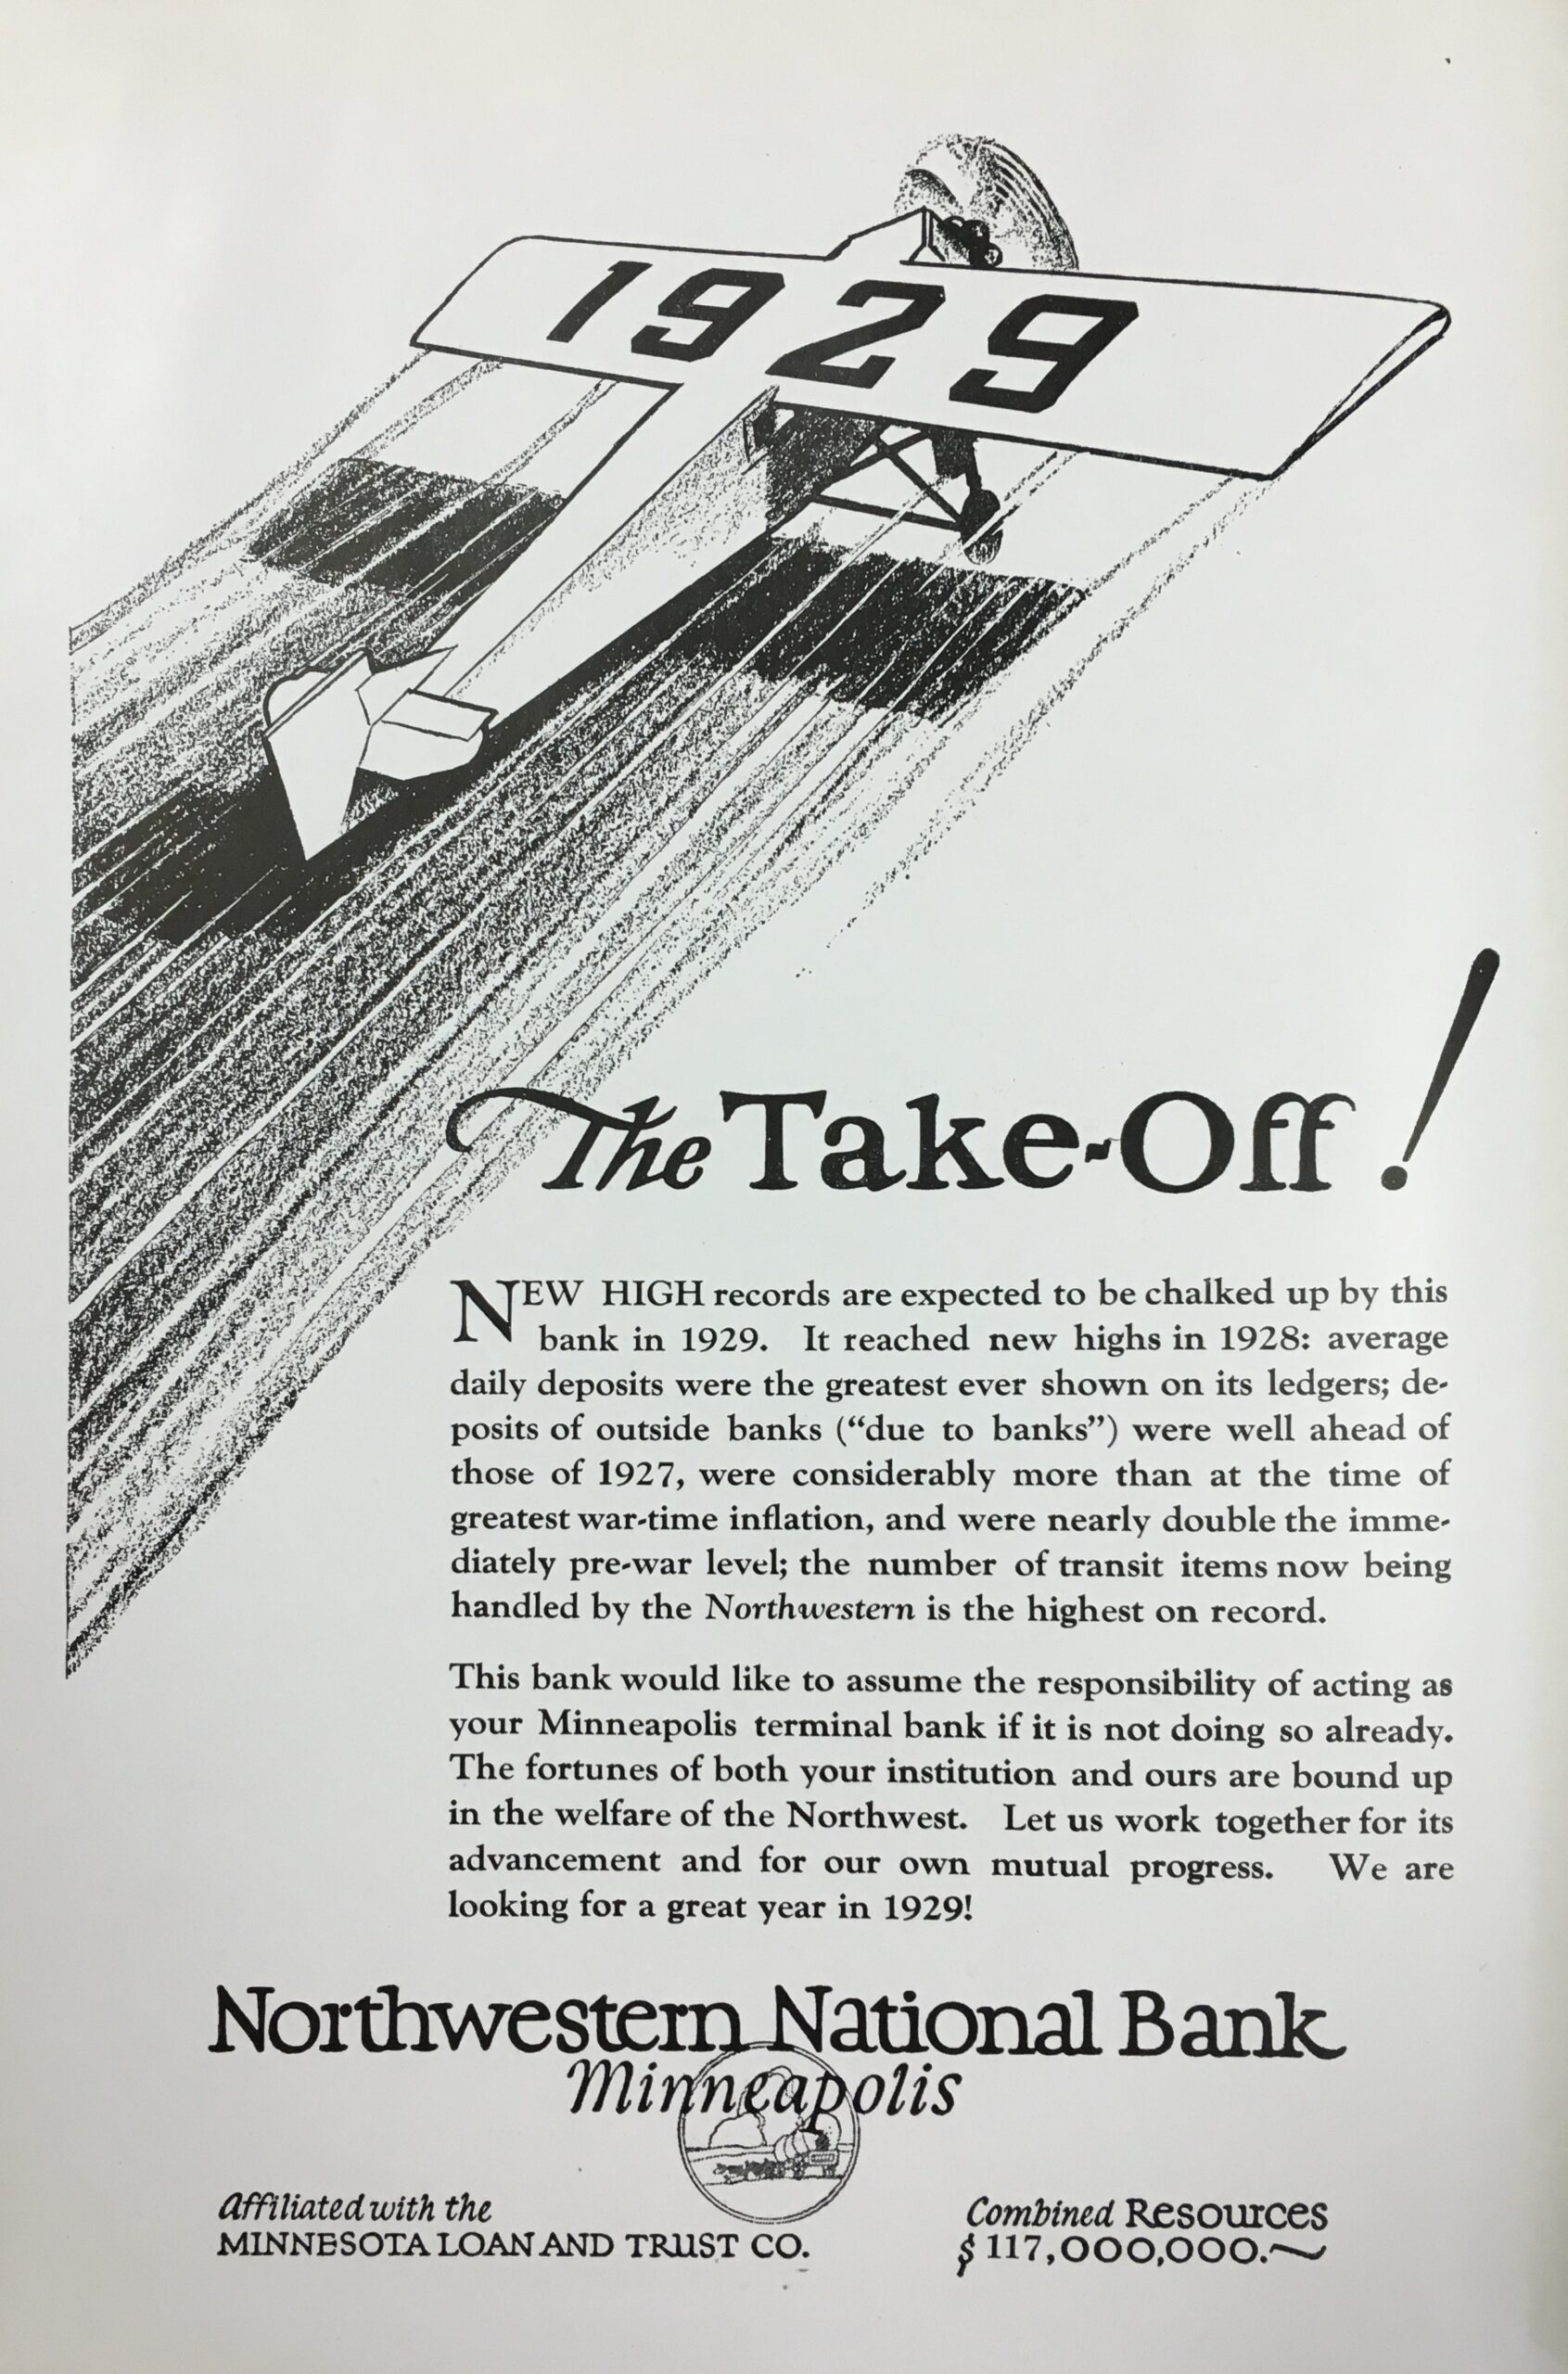 A grey Northwestern National Bank ad that reads: The Take off! New high records are expected to be chalked up by this bank in 1929. It reached new highs in 1928: average daily deposits were the greatest ever shown on its ledgers; deposits of outside banks (“due to banks”) were well ahead of those of 1927, were considerably more than at the time of greatest pre-war level; the number of transit items now being handled by the Northwestern is the highest on record. Image link will enlarge image.